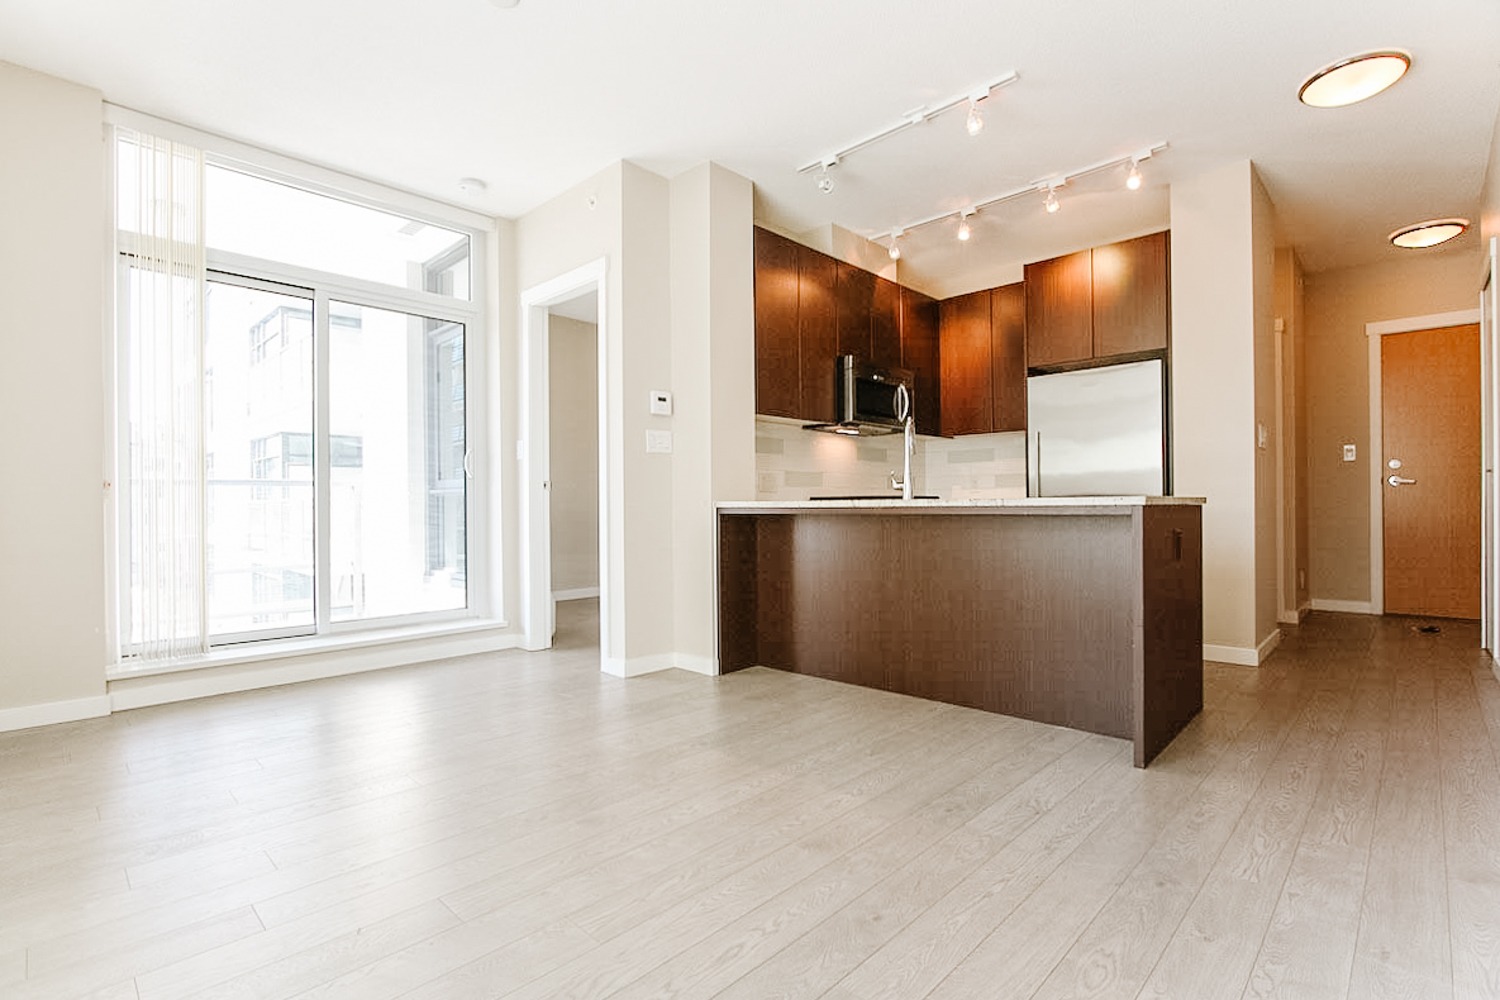 one-bedroom-condo-for-rent-in-lower-lonsdale-north-vancouver-10